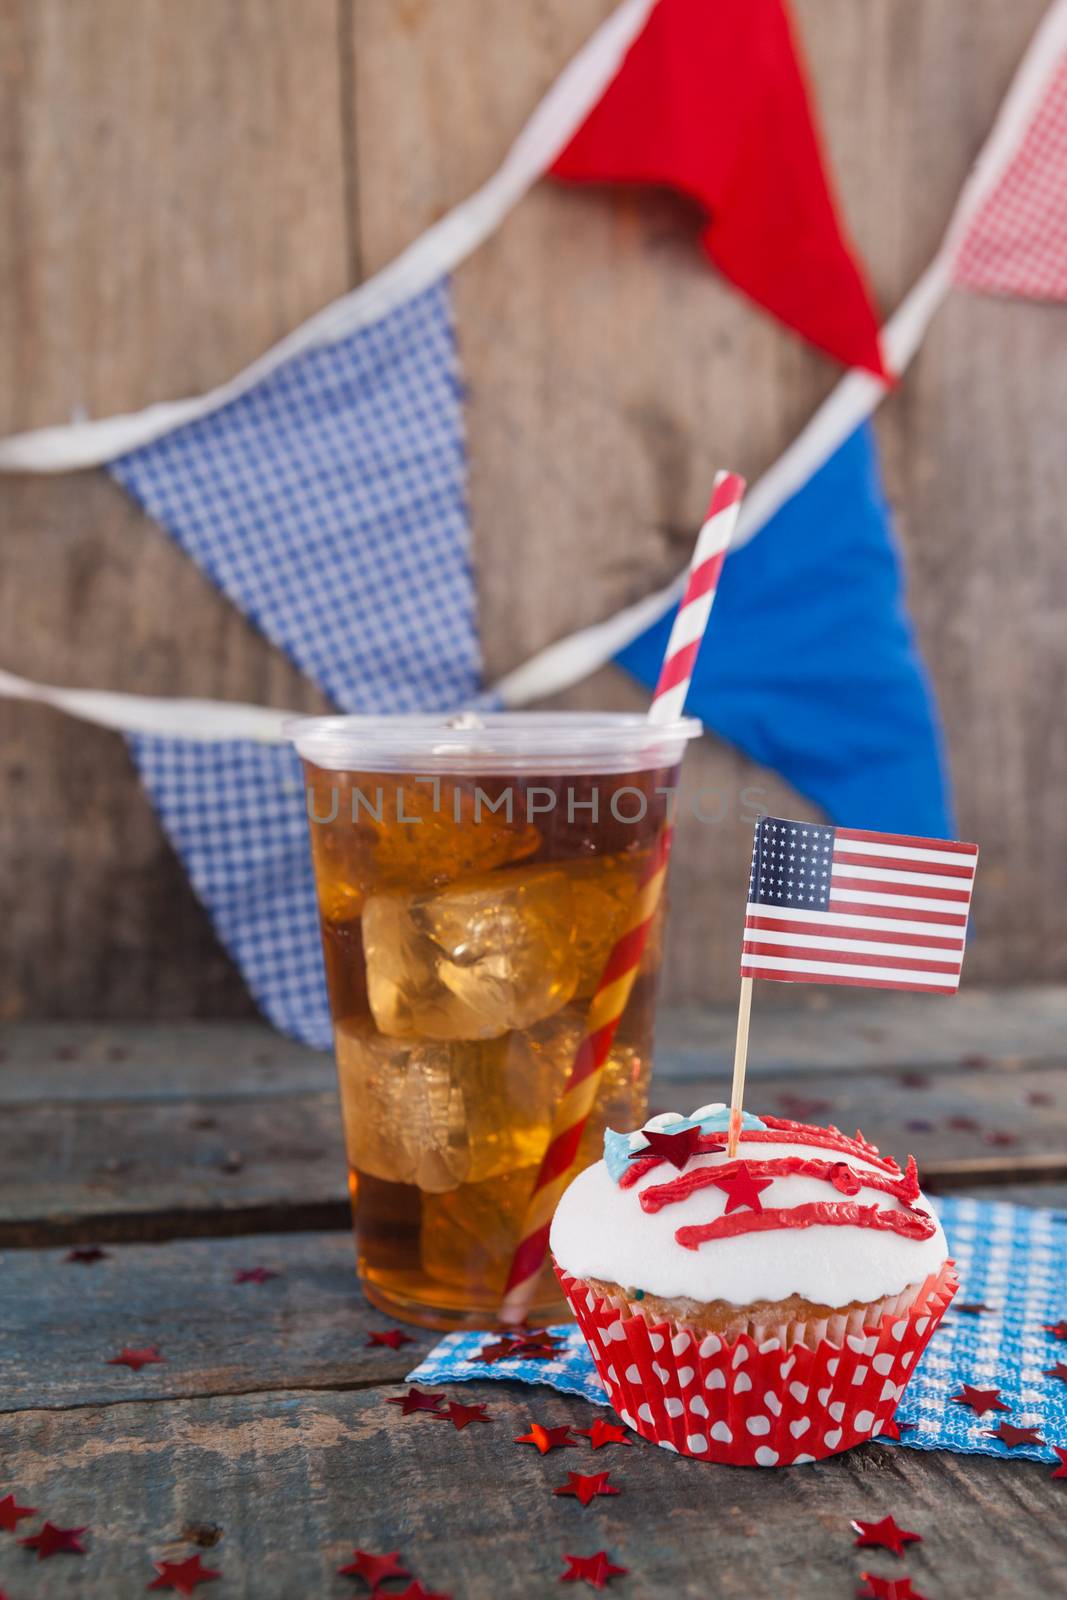 Decorated cupcake and cold drink with 4th july theme by Wavebreakmedia